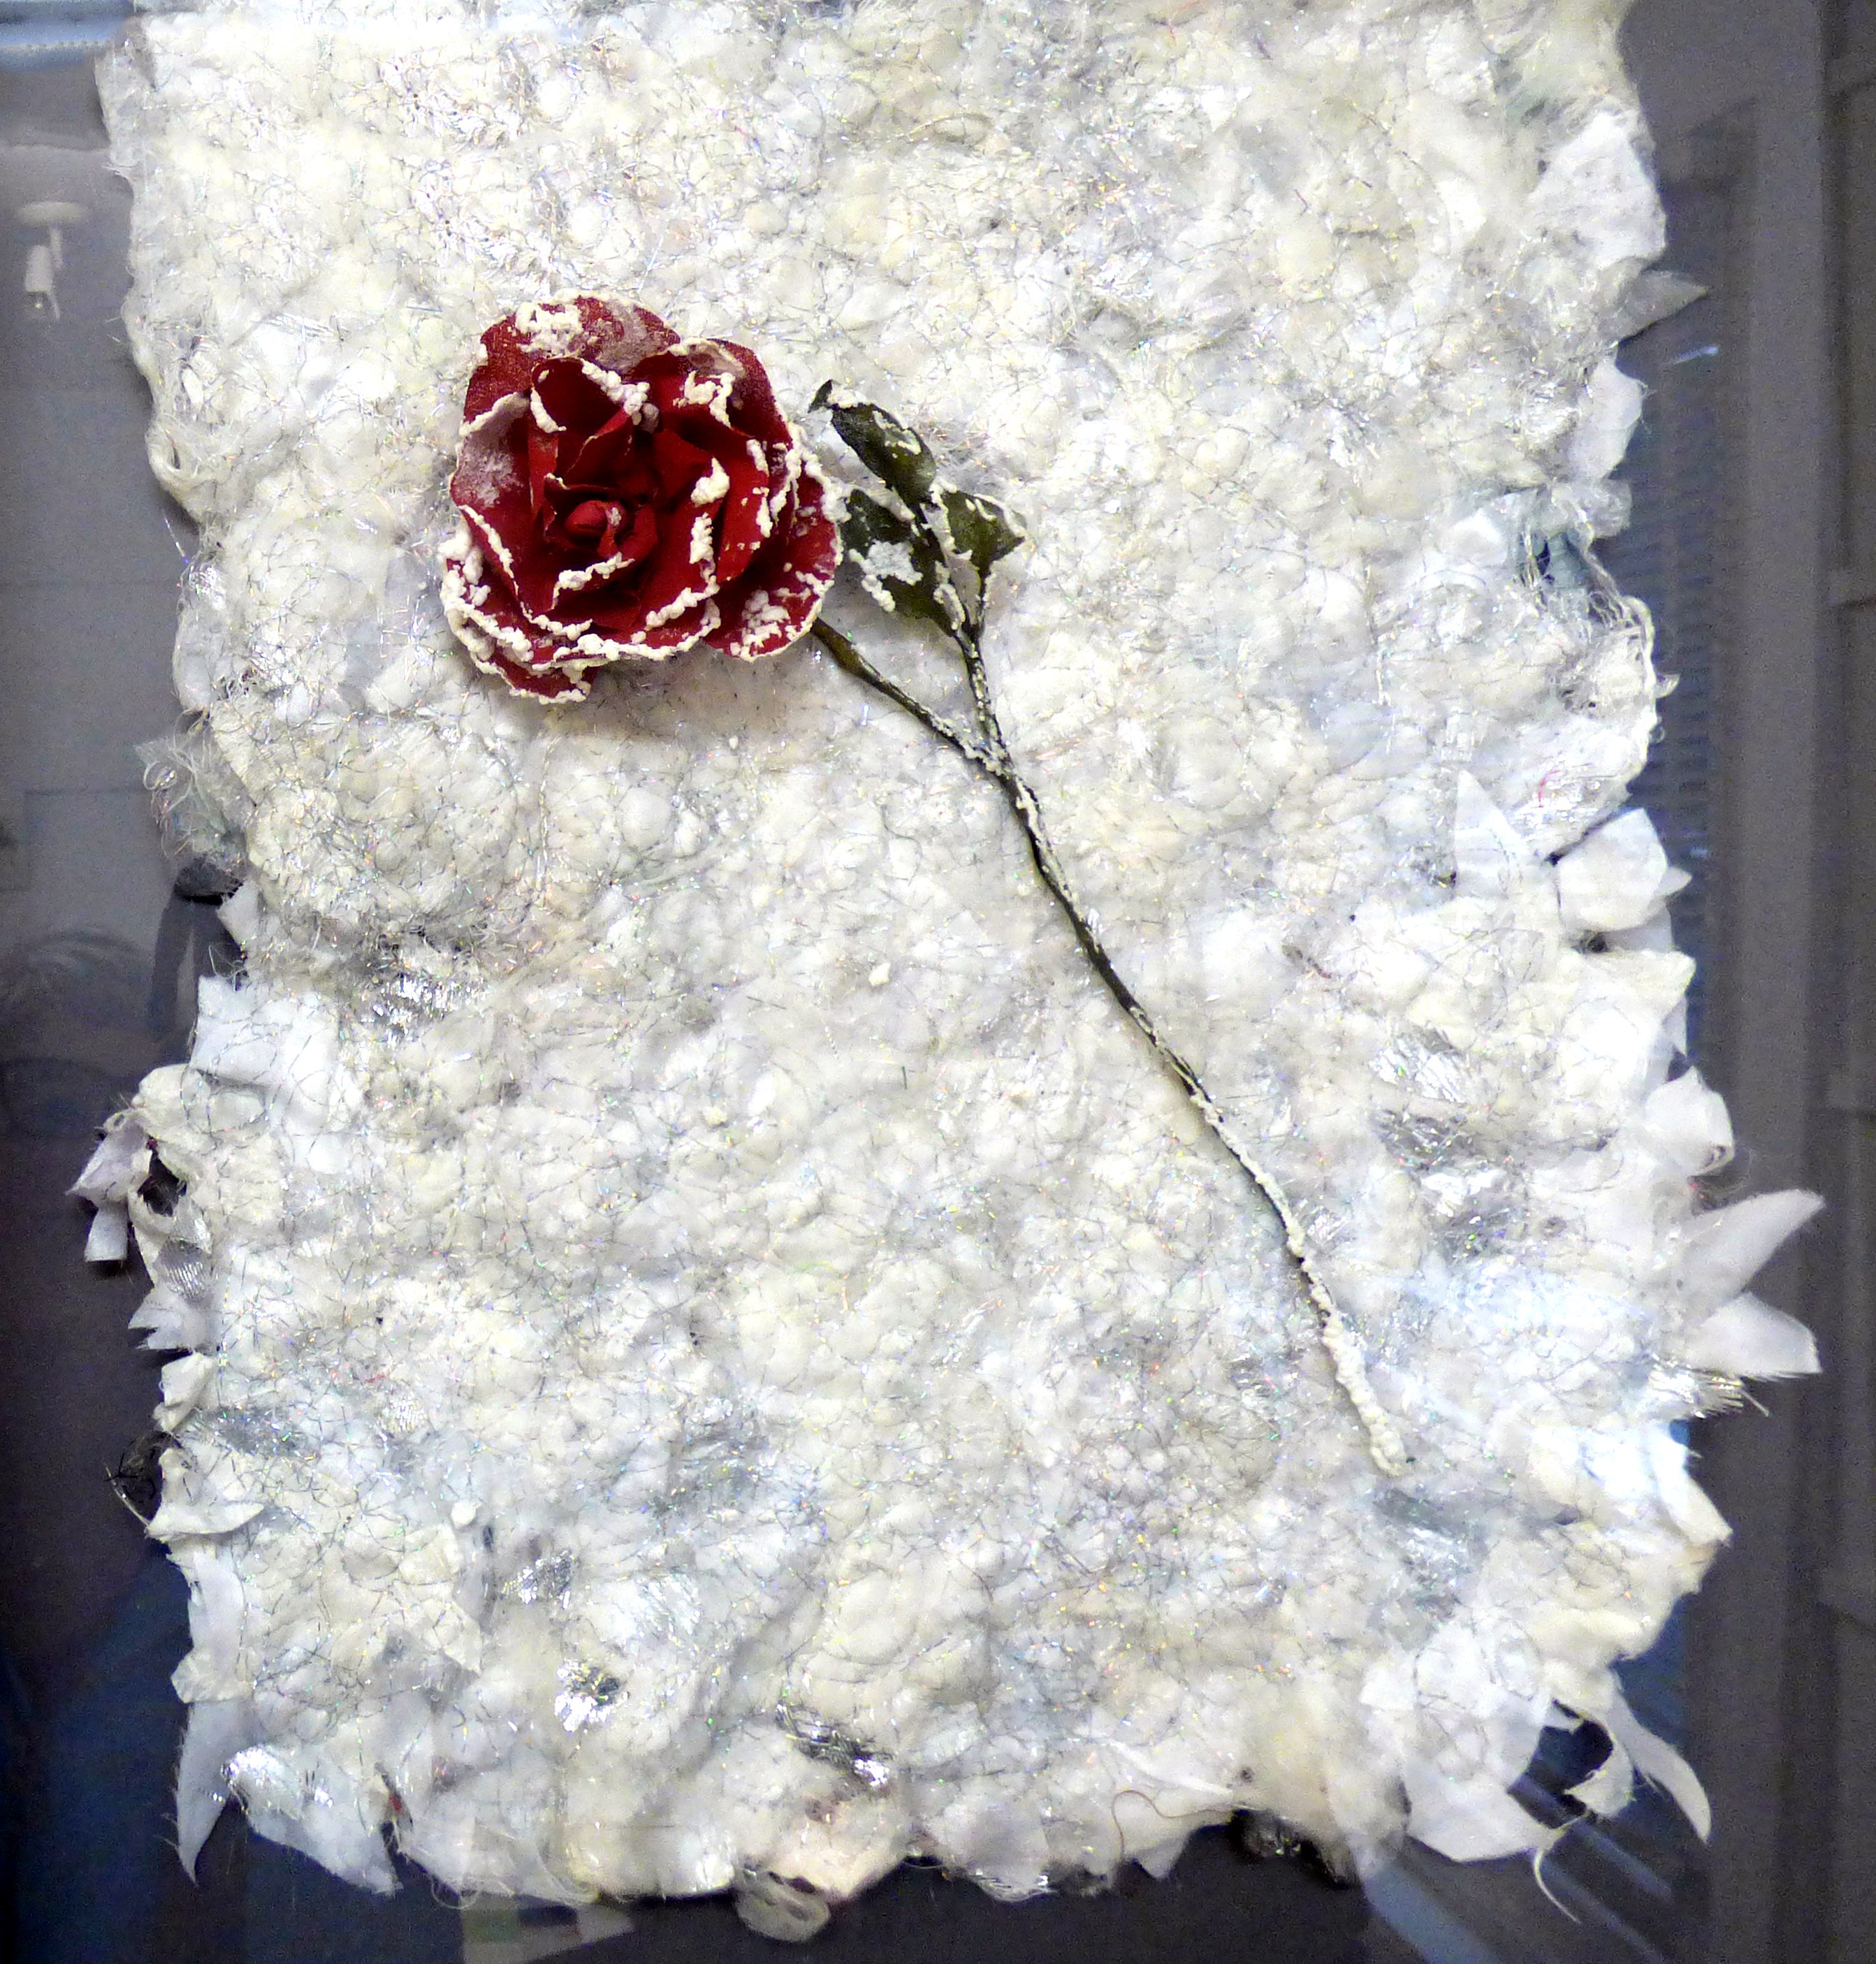 SNOW ROSE by Kathy Hoolahan, machine stitching, ConText group 2018